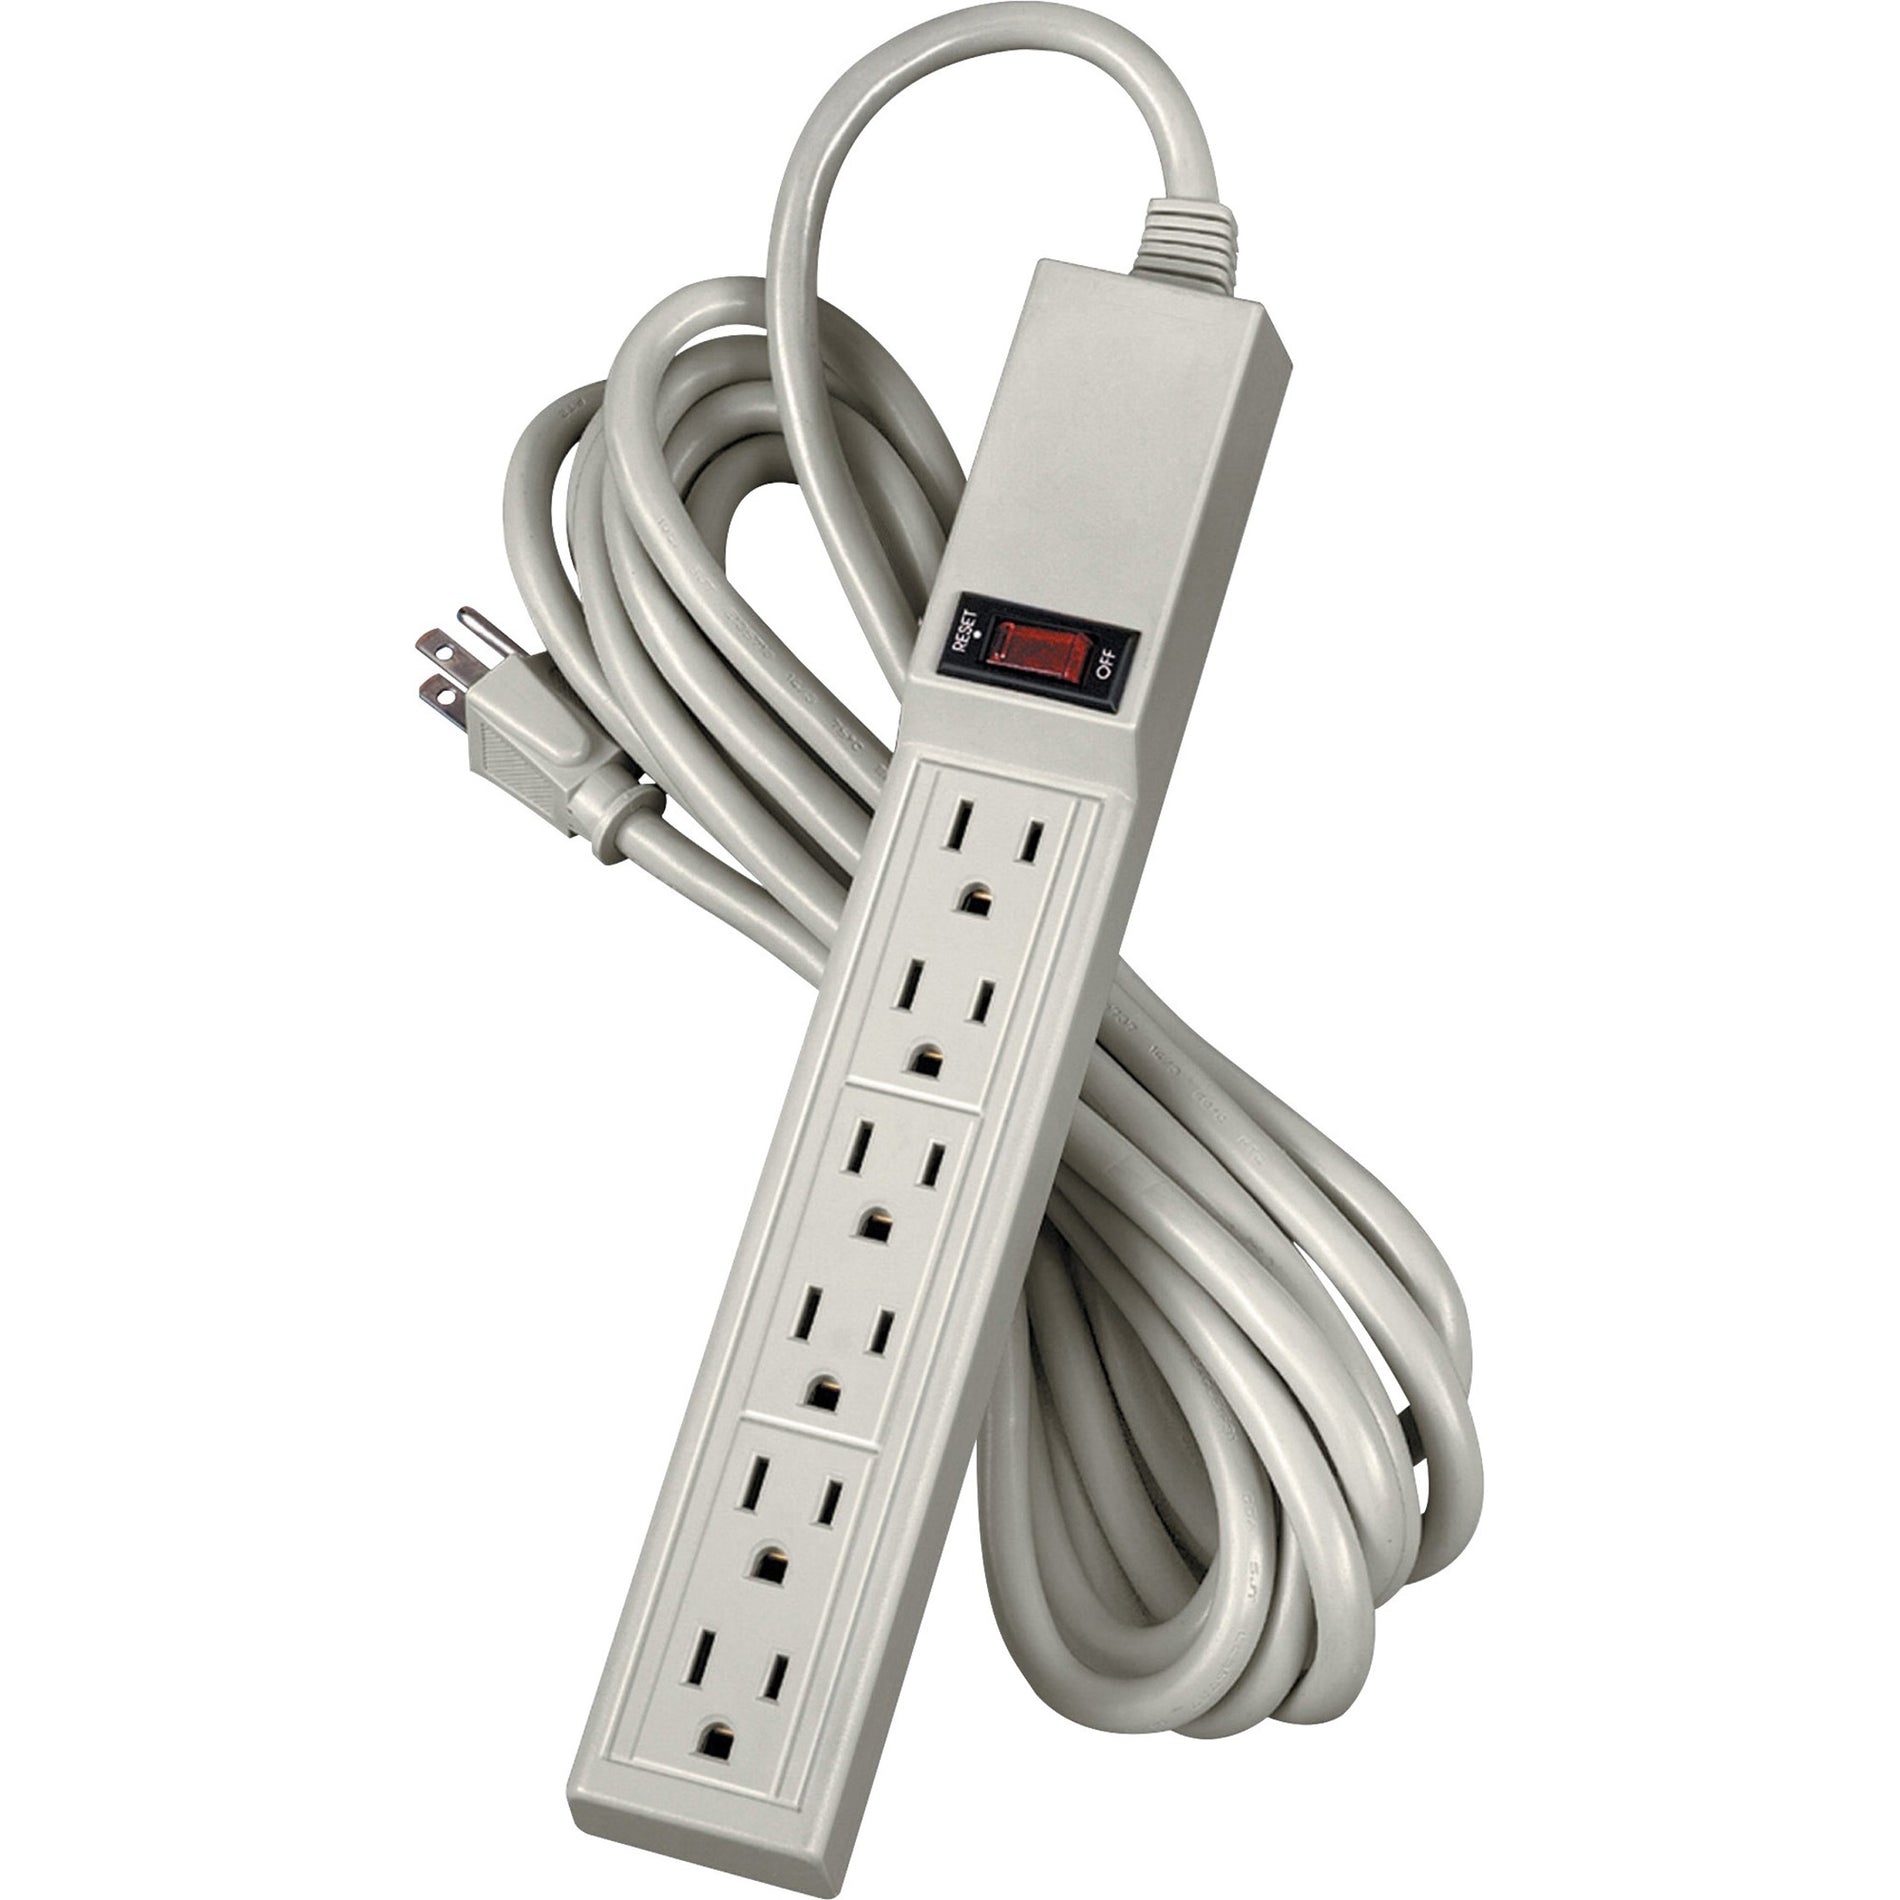 Fellowes 99026 6-Outlet Power Strip with 15' Long Cord, Platinum